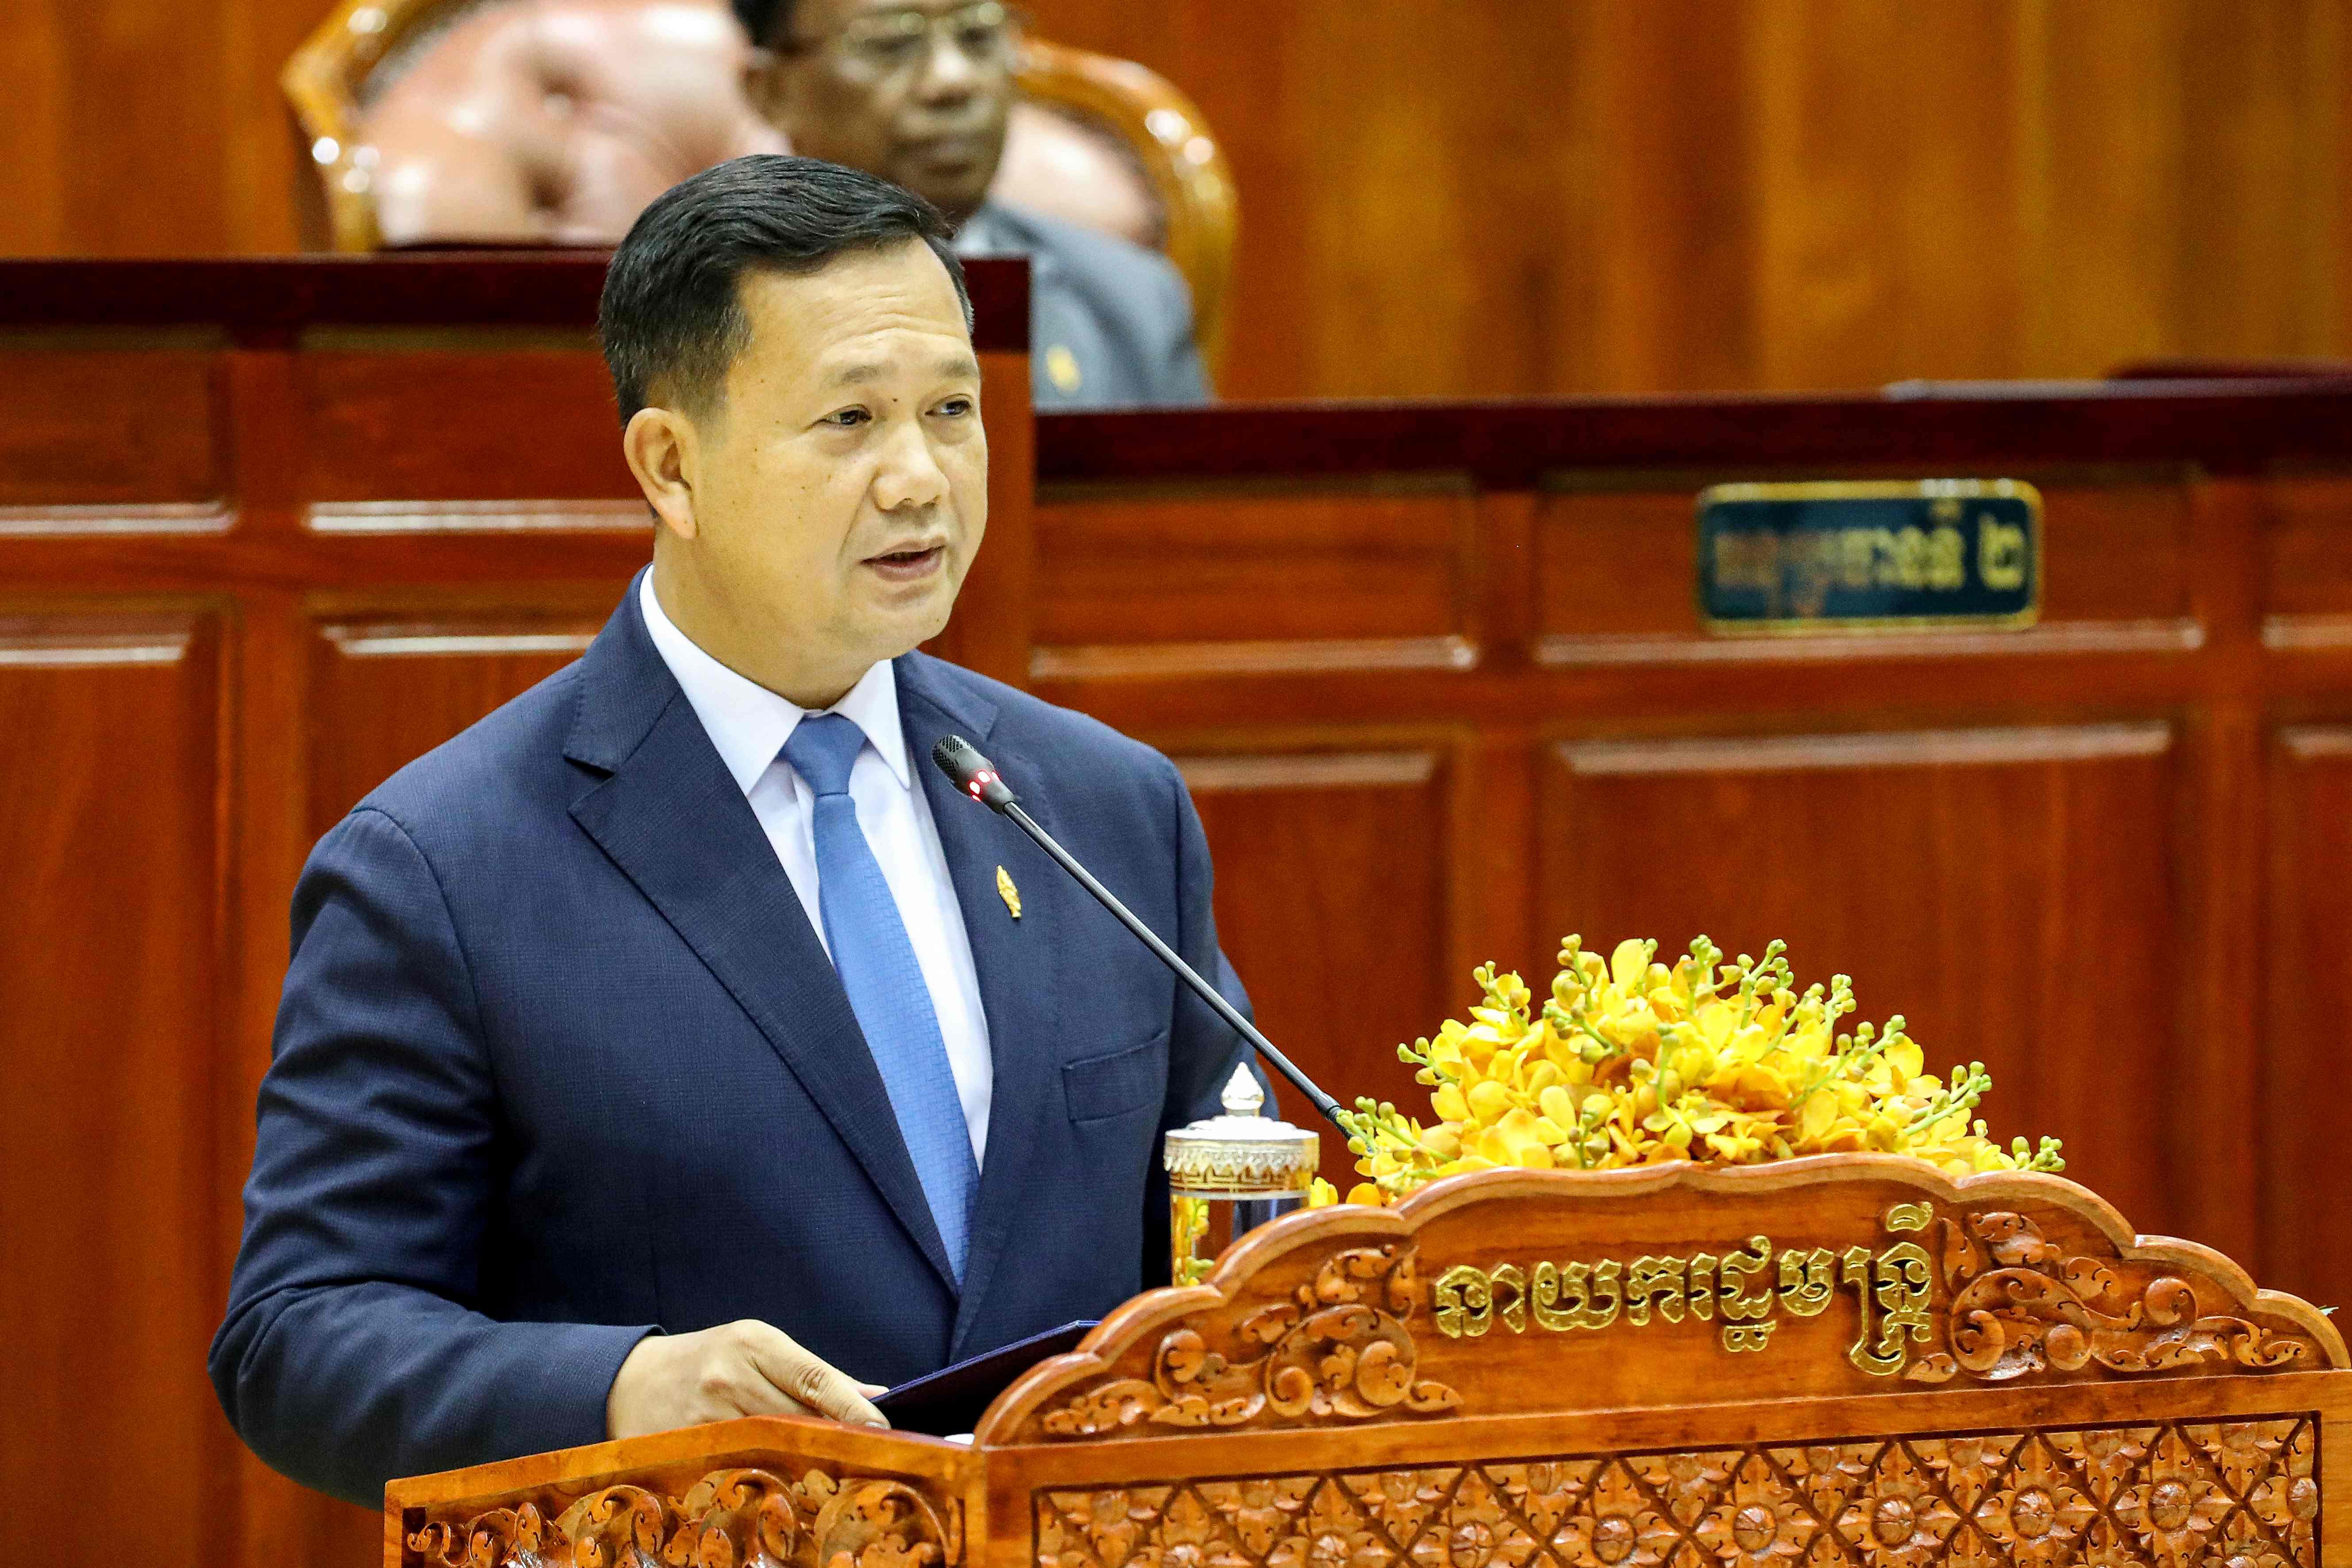 Cambodia’s Prime Minister Hun Manet delivering a speech during a parliamentary meeting at the National Assembly building